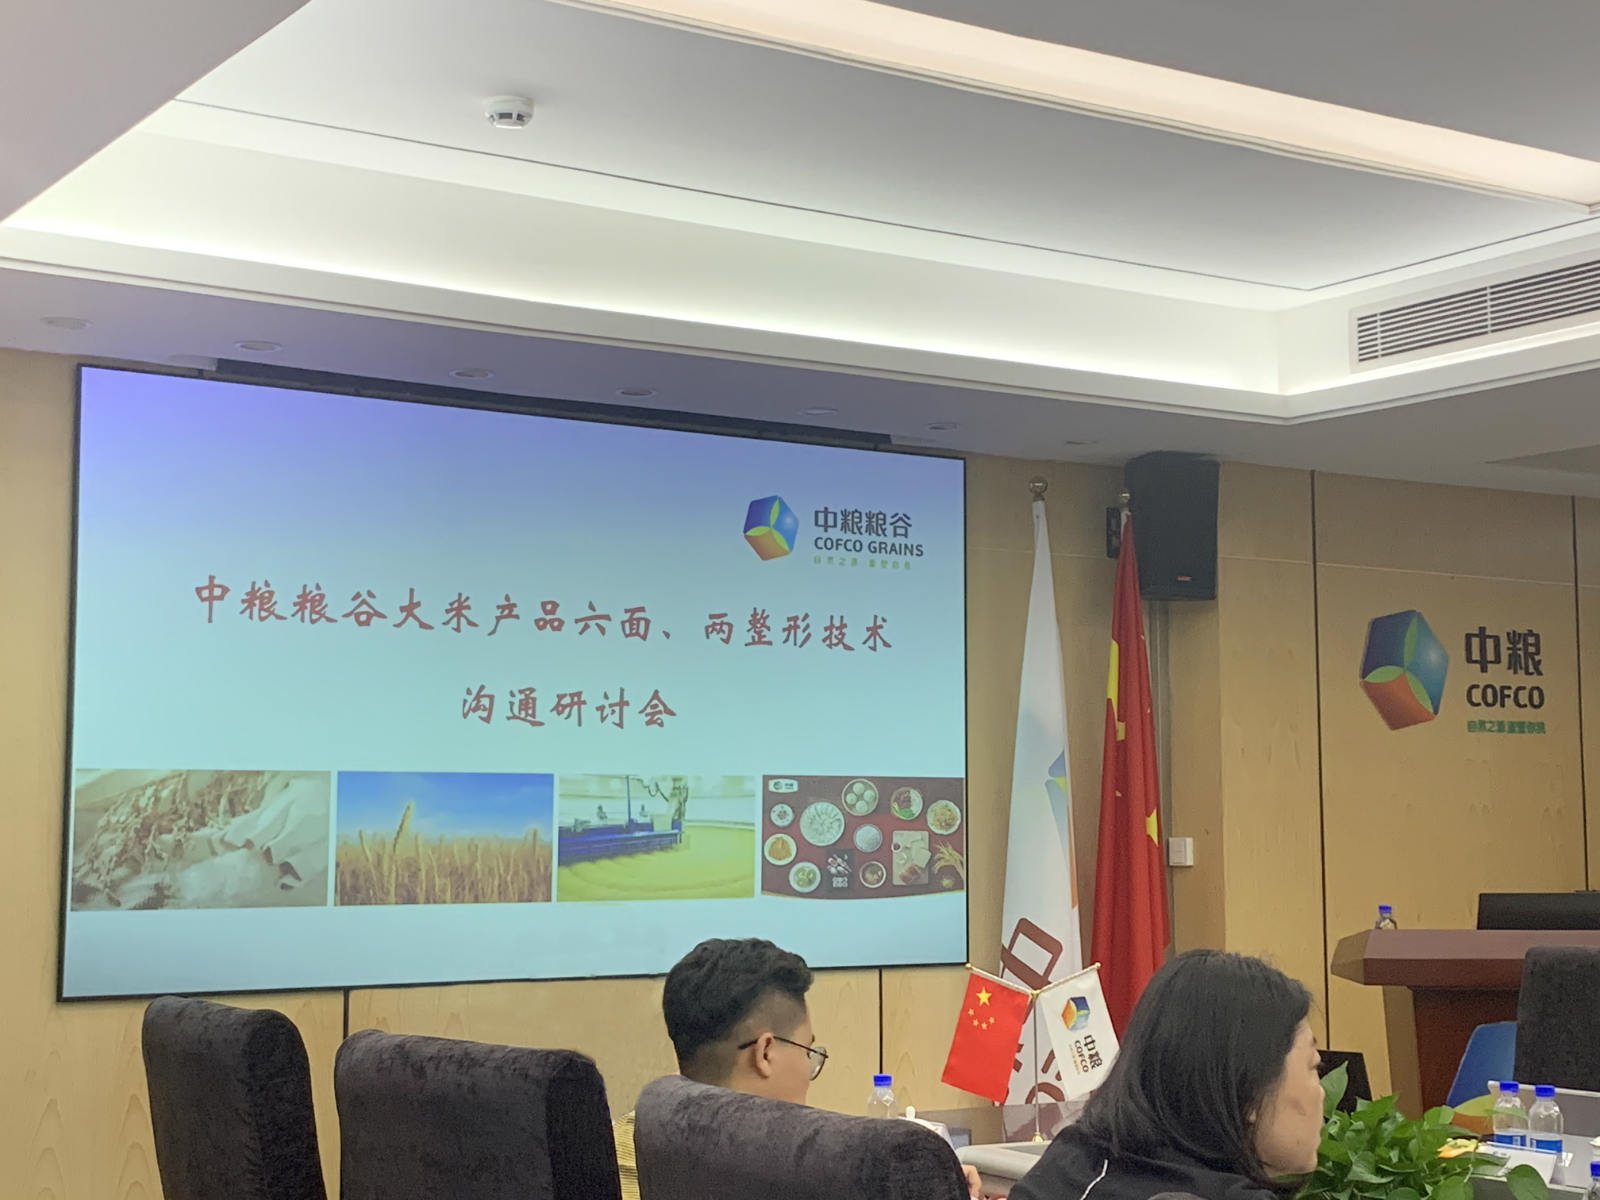 Our company participated in the communication seminar on six-sided and two-sided plastic surgery of COFCO Grain and Rice products